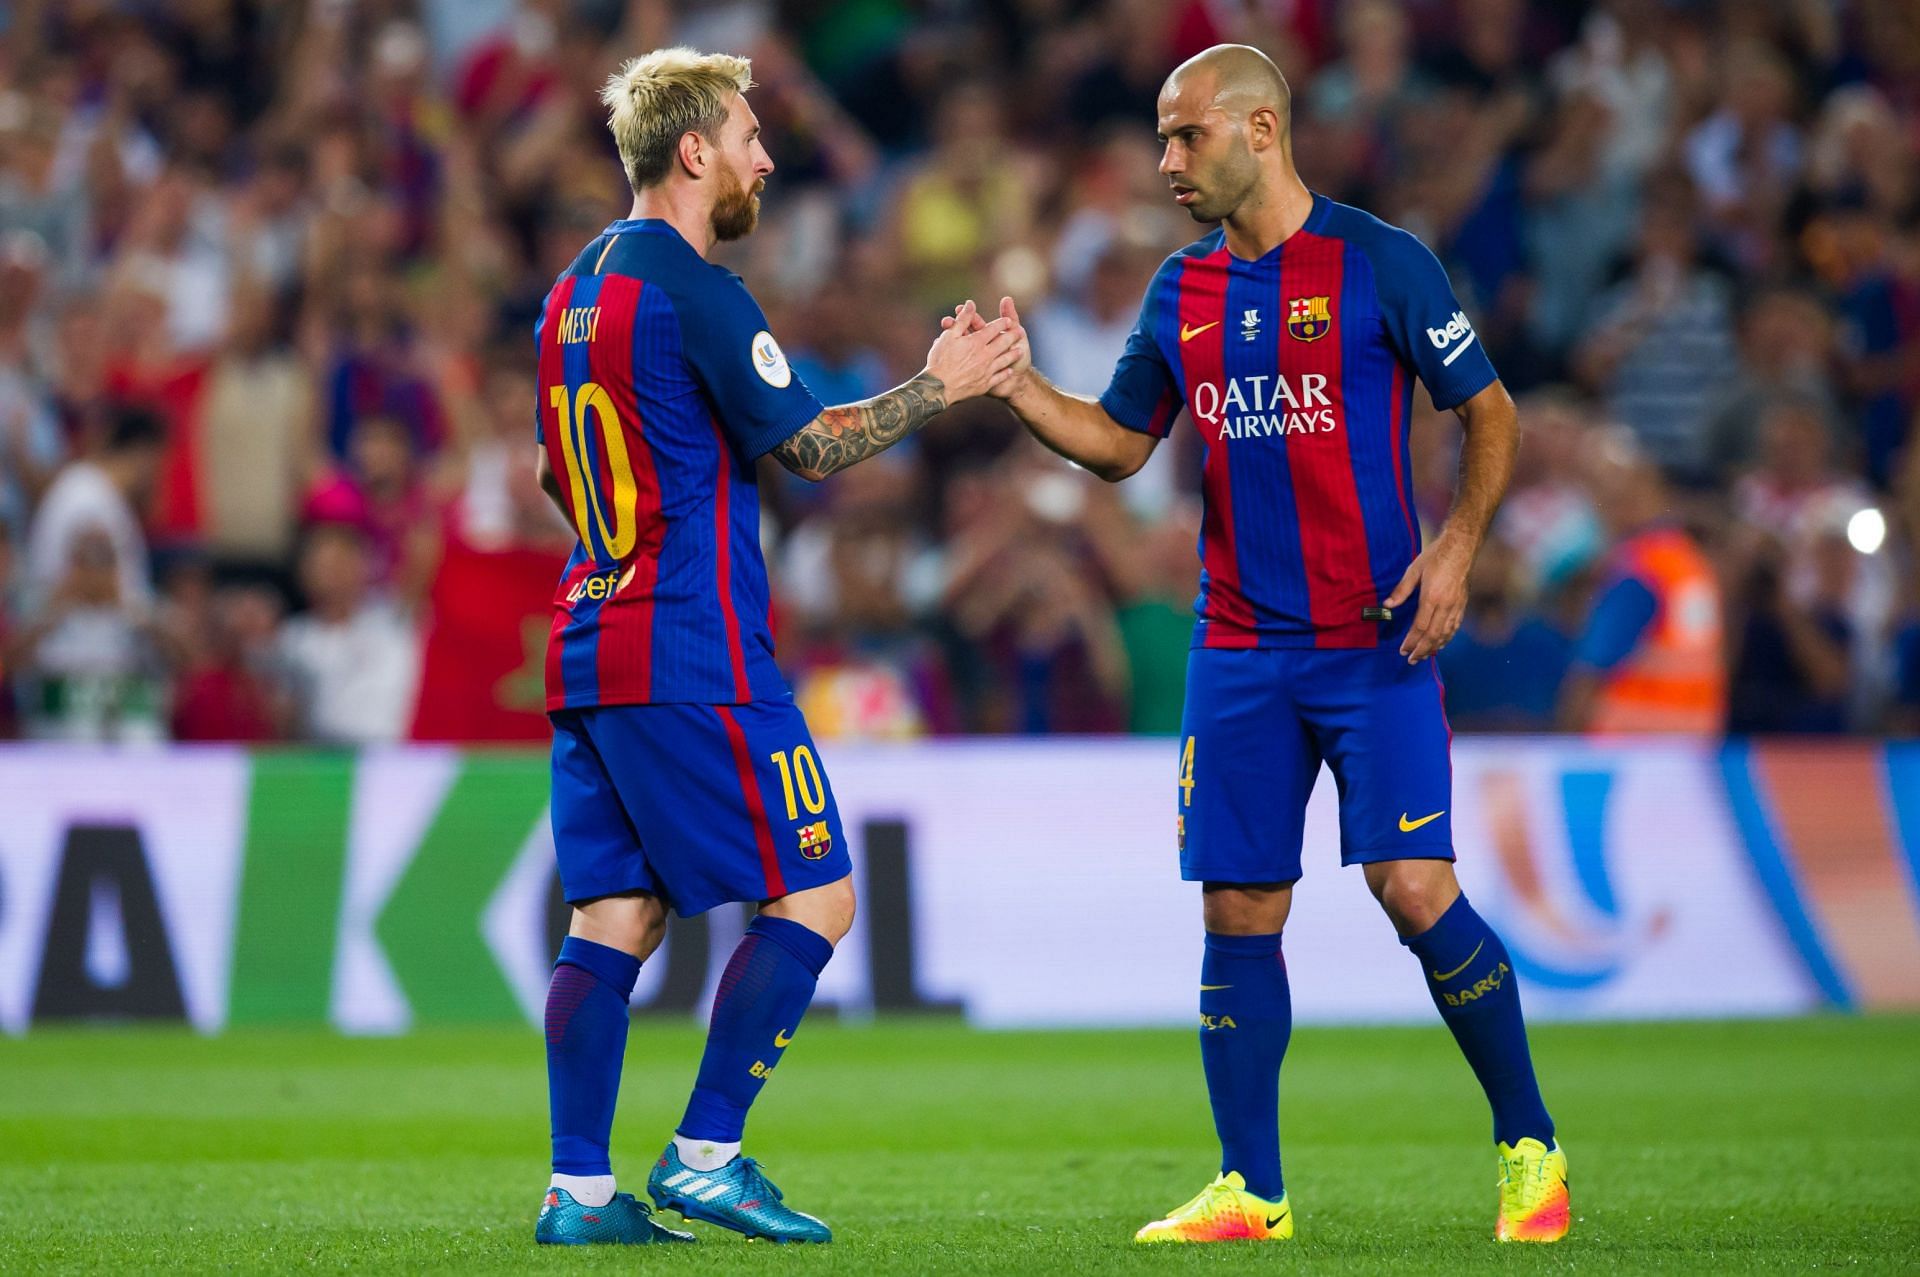 Javier Mascherano (right) played alongside Lionel Messi for club and country